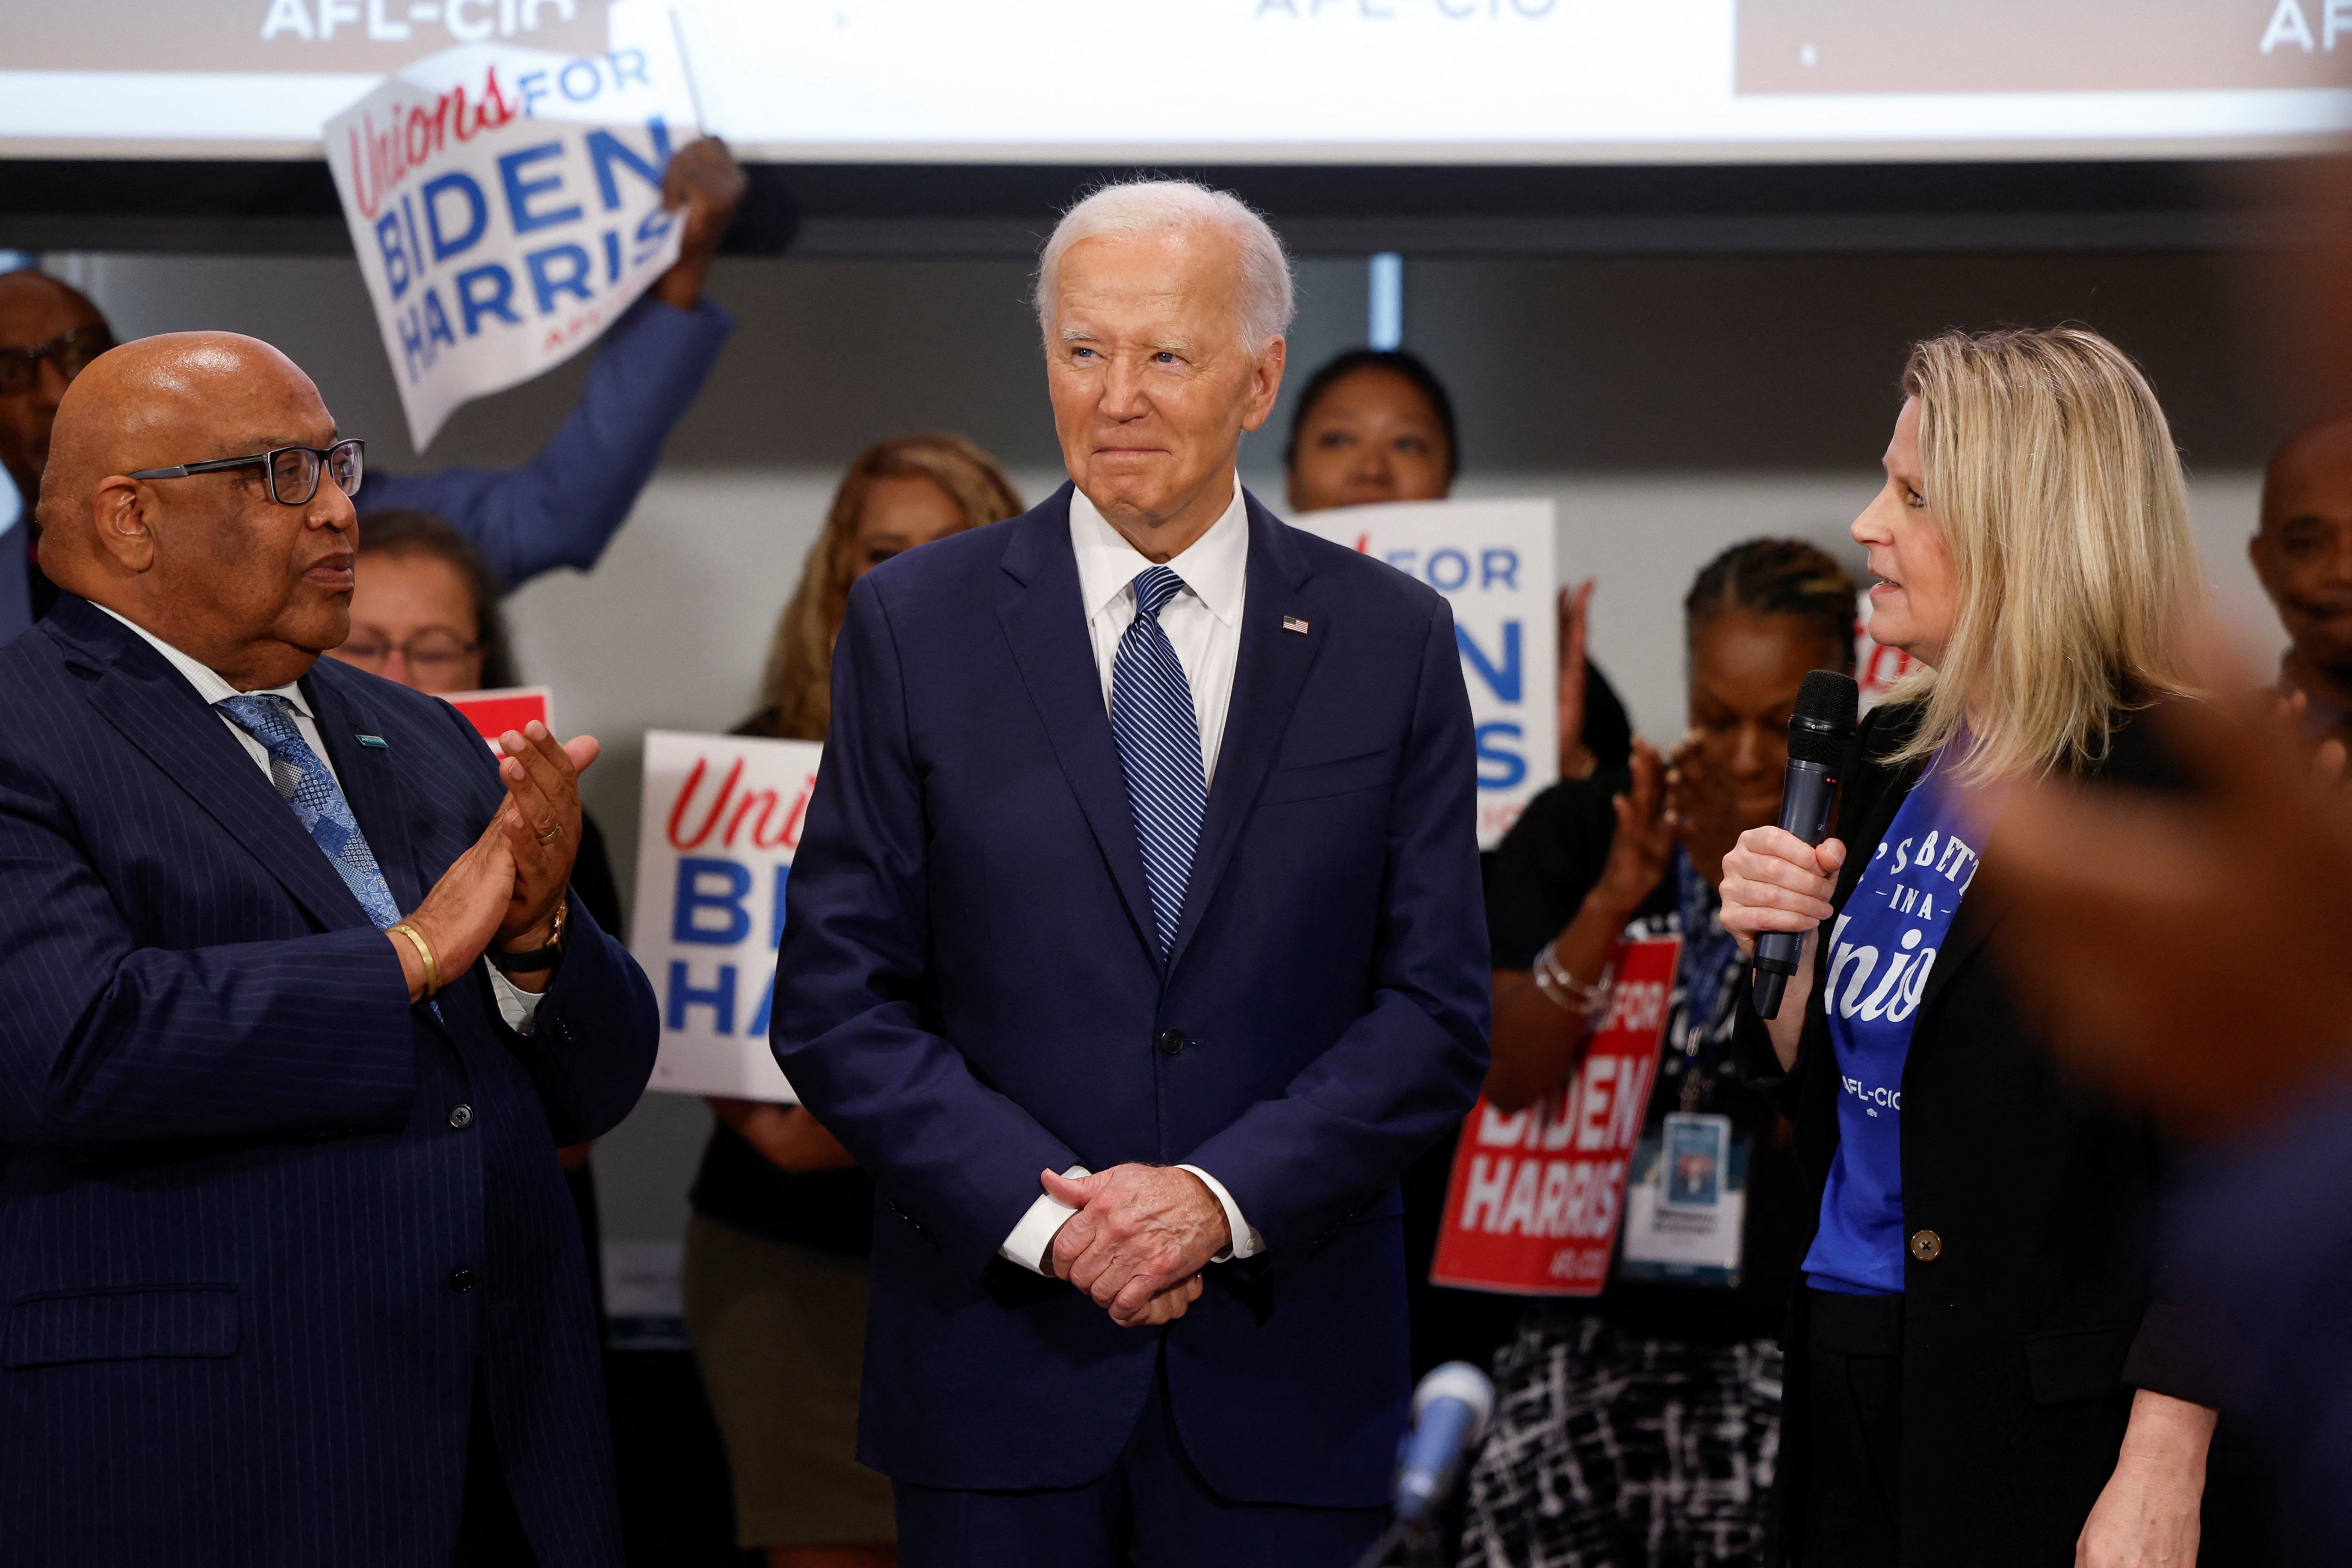 Joe Biden attends a campaign event with national union leaders on July 10 in Washington DC.